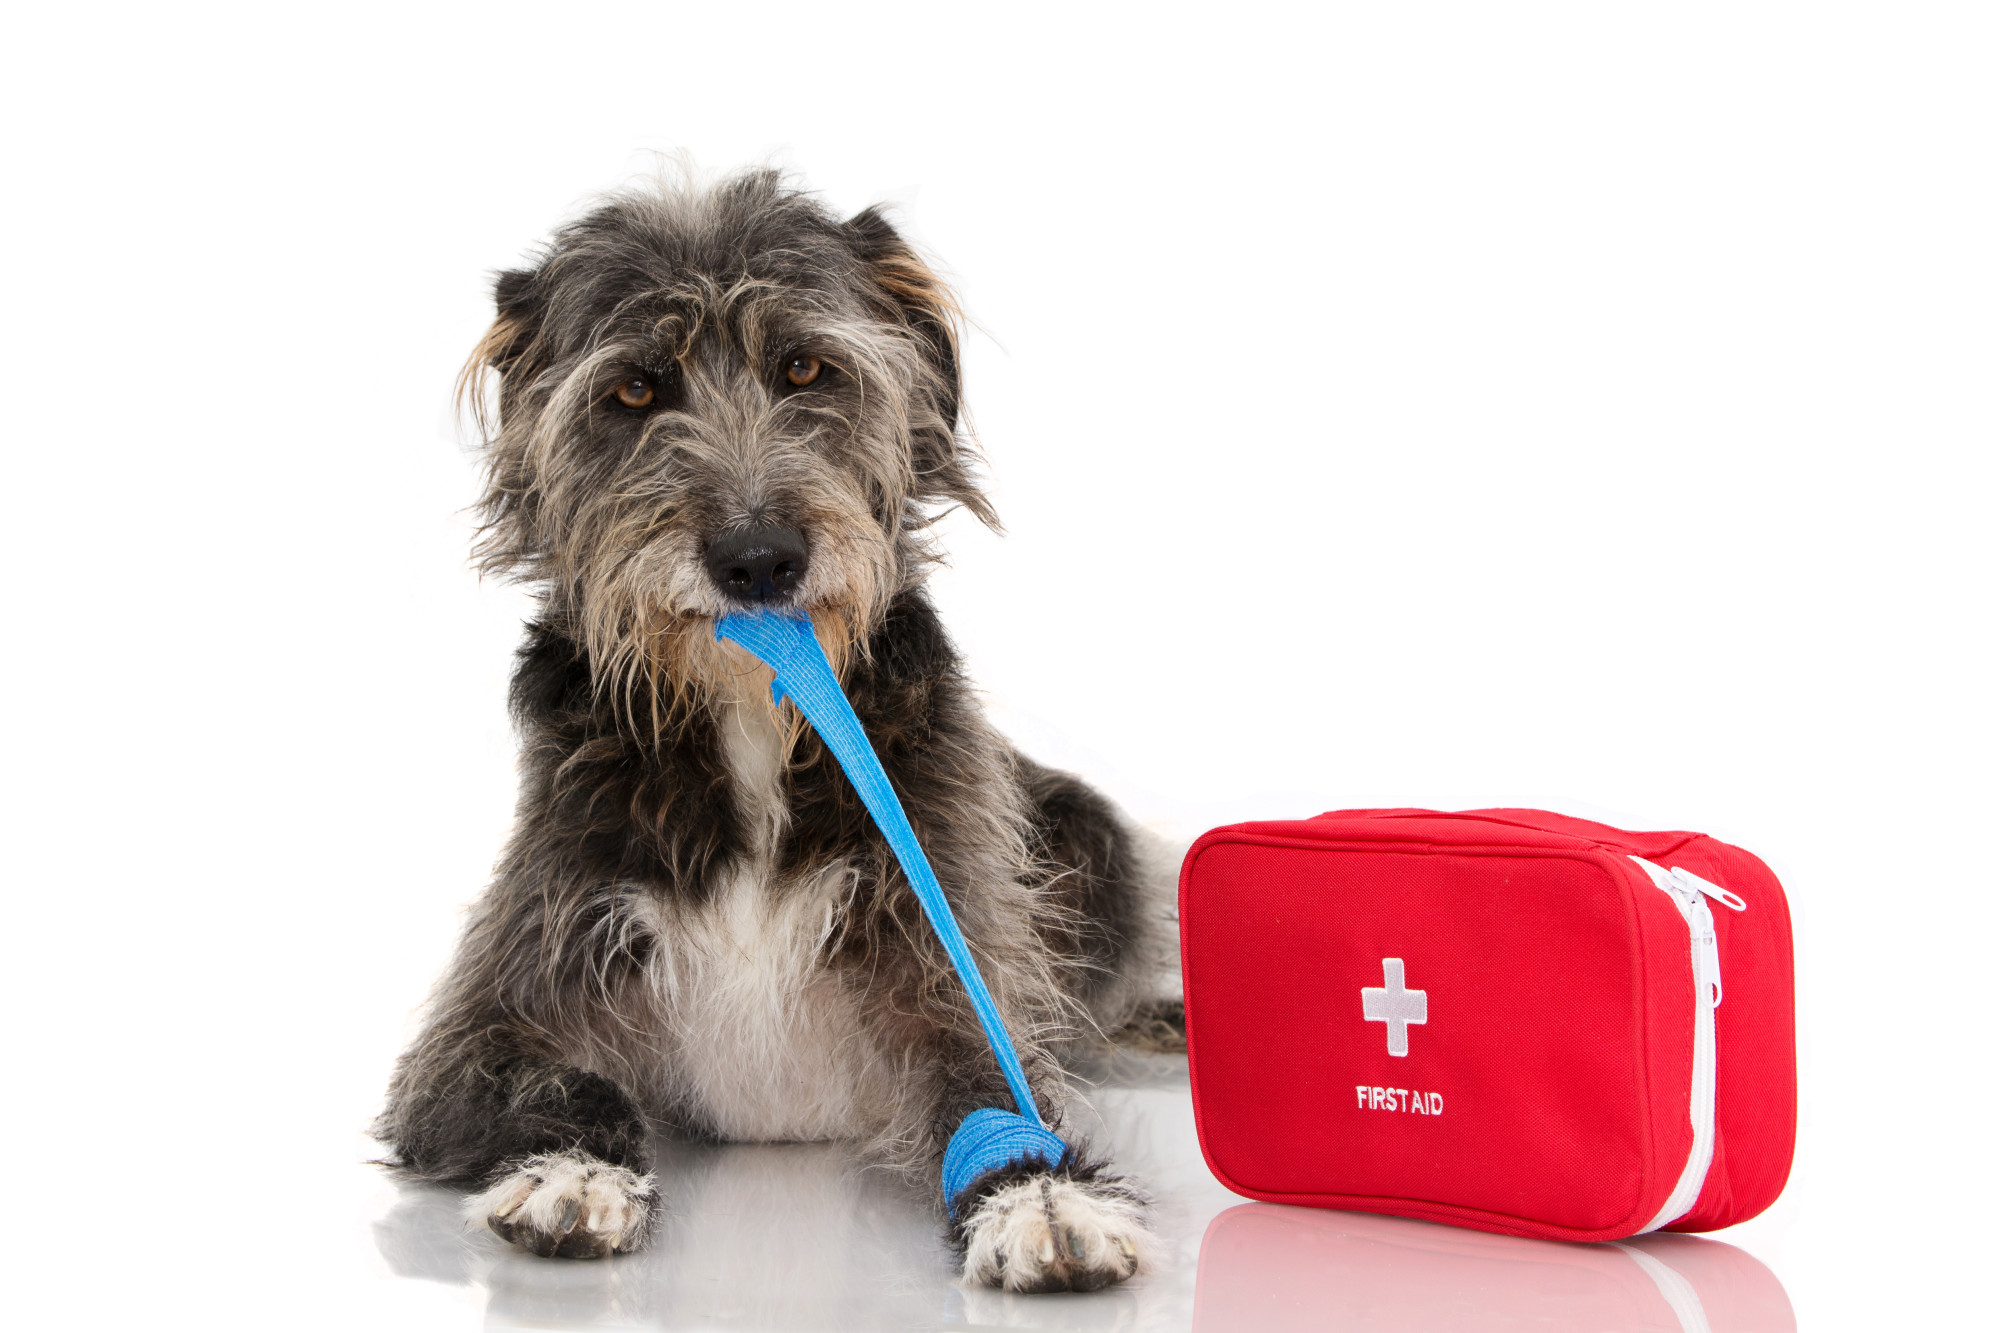 Pet CPR: What Topics Will I Cover?